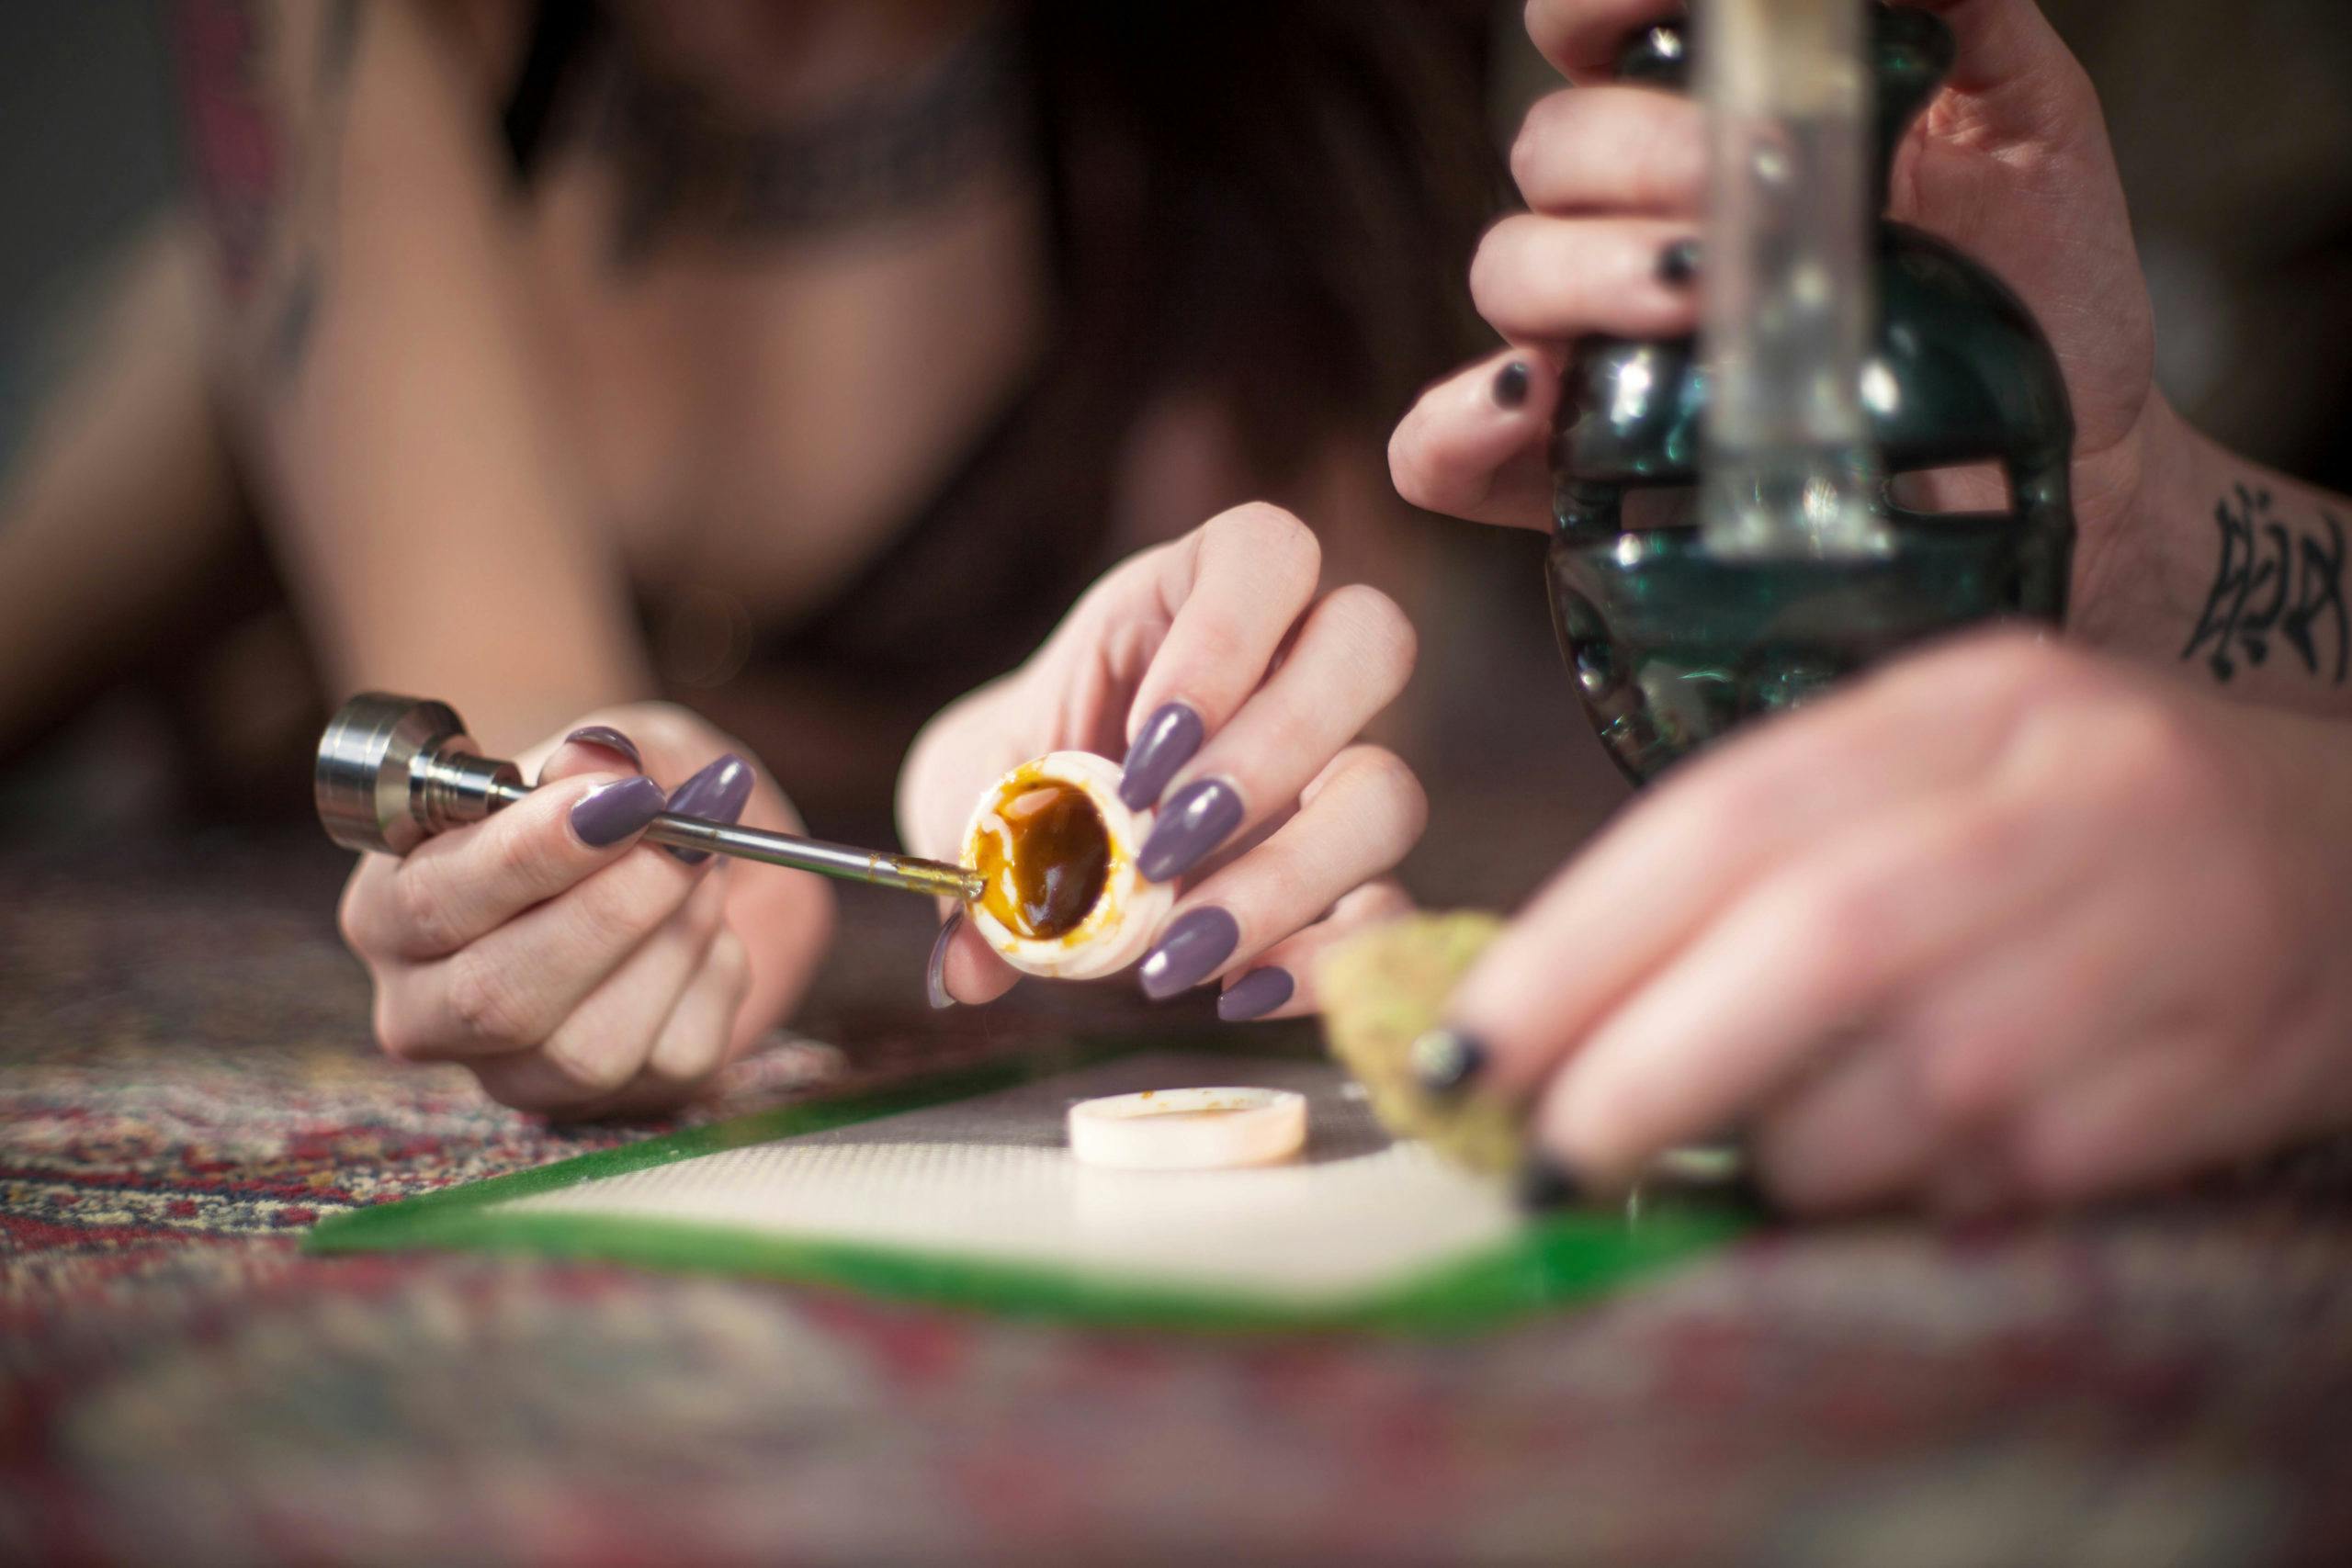 Two young ladies use a metal dabber to scoop concentrated THC ca